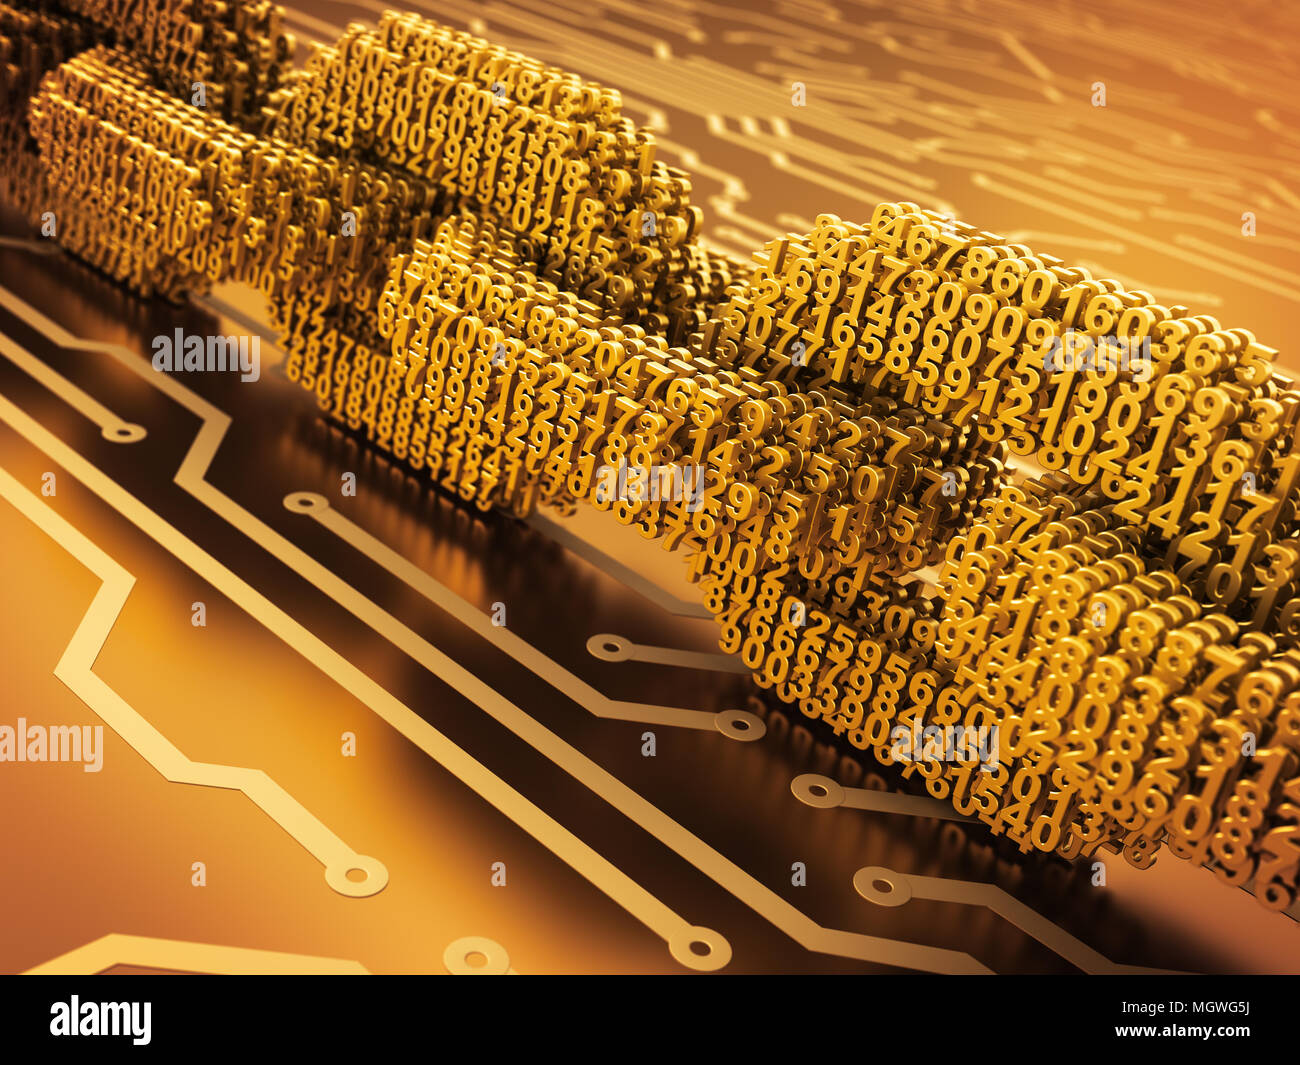 Concept Of Blockchain. Digital Chain Of Interconnected 3D Numbers On Gold Printed Circuit Board. 3D Illustration. Stock Photo